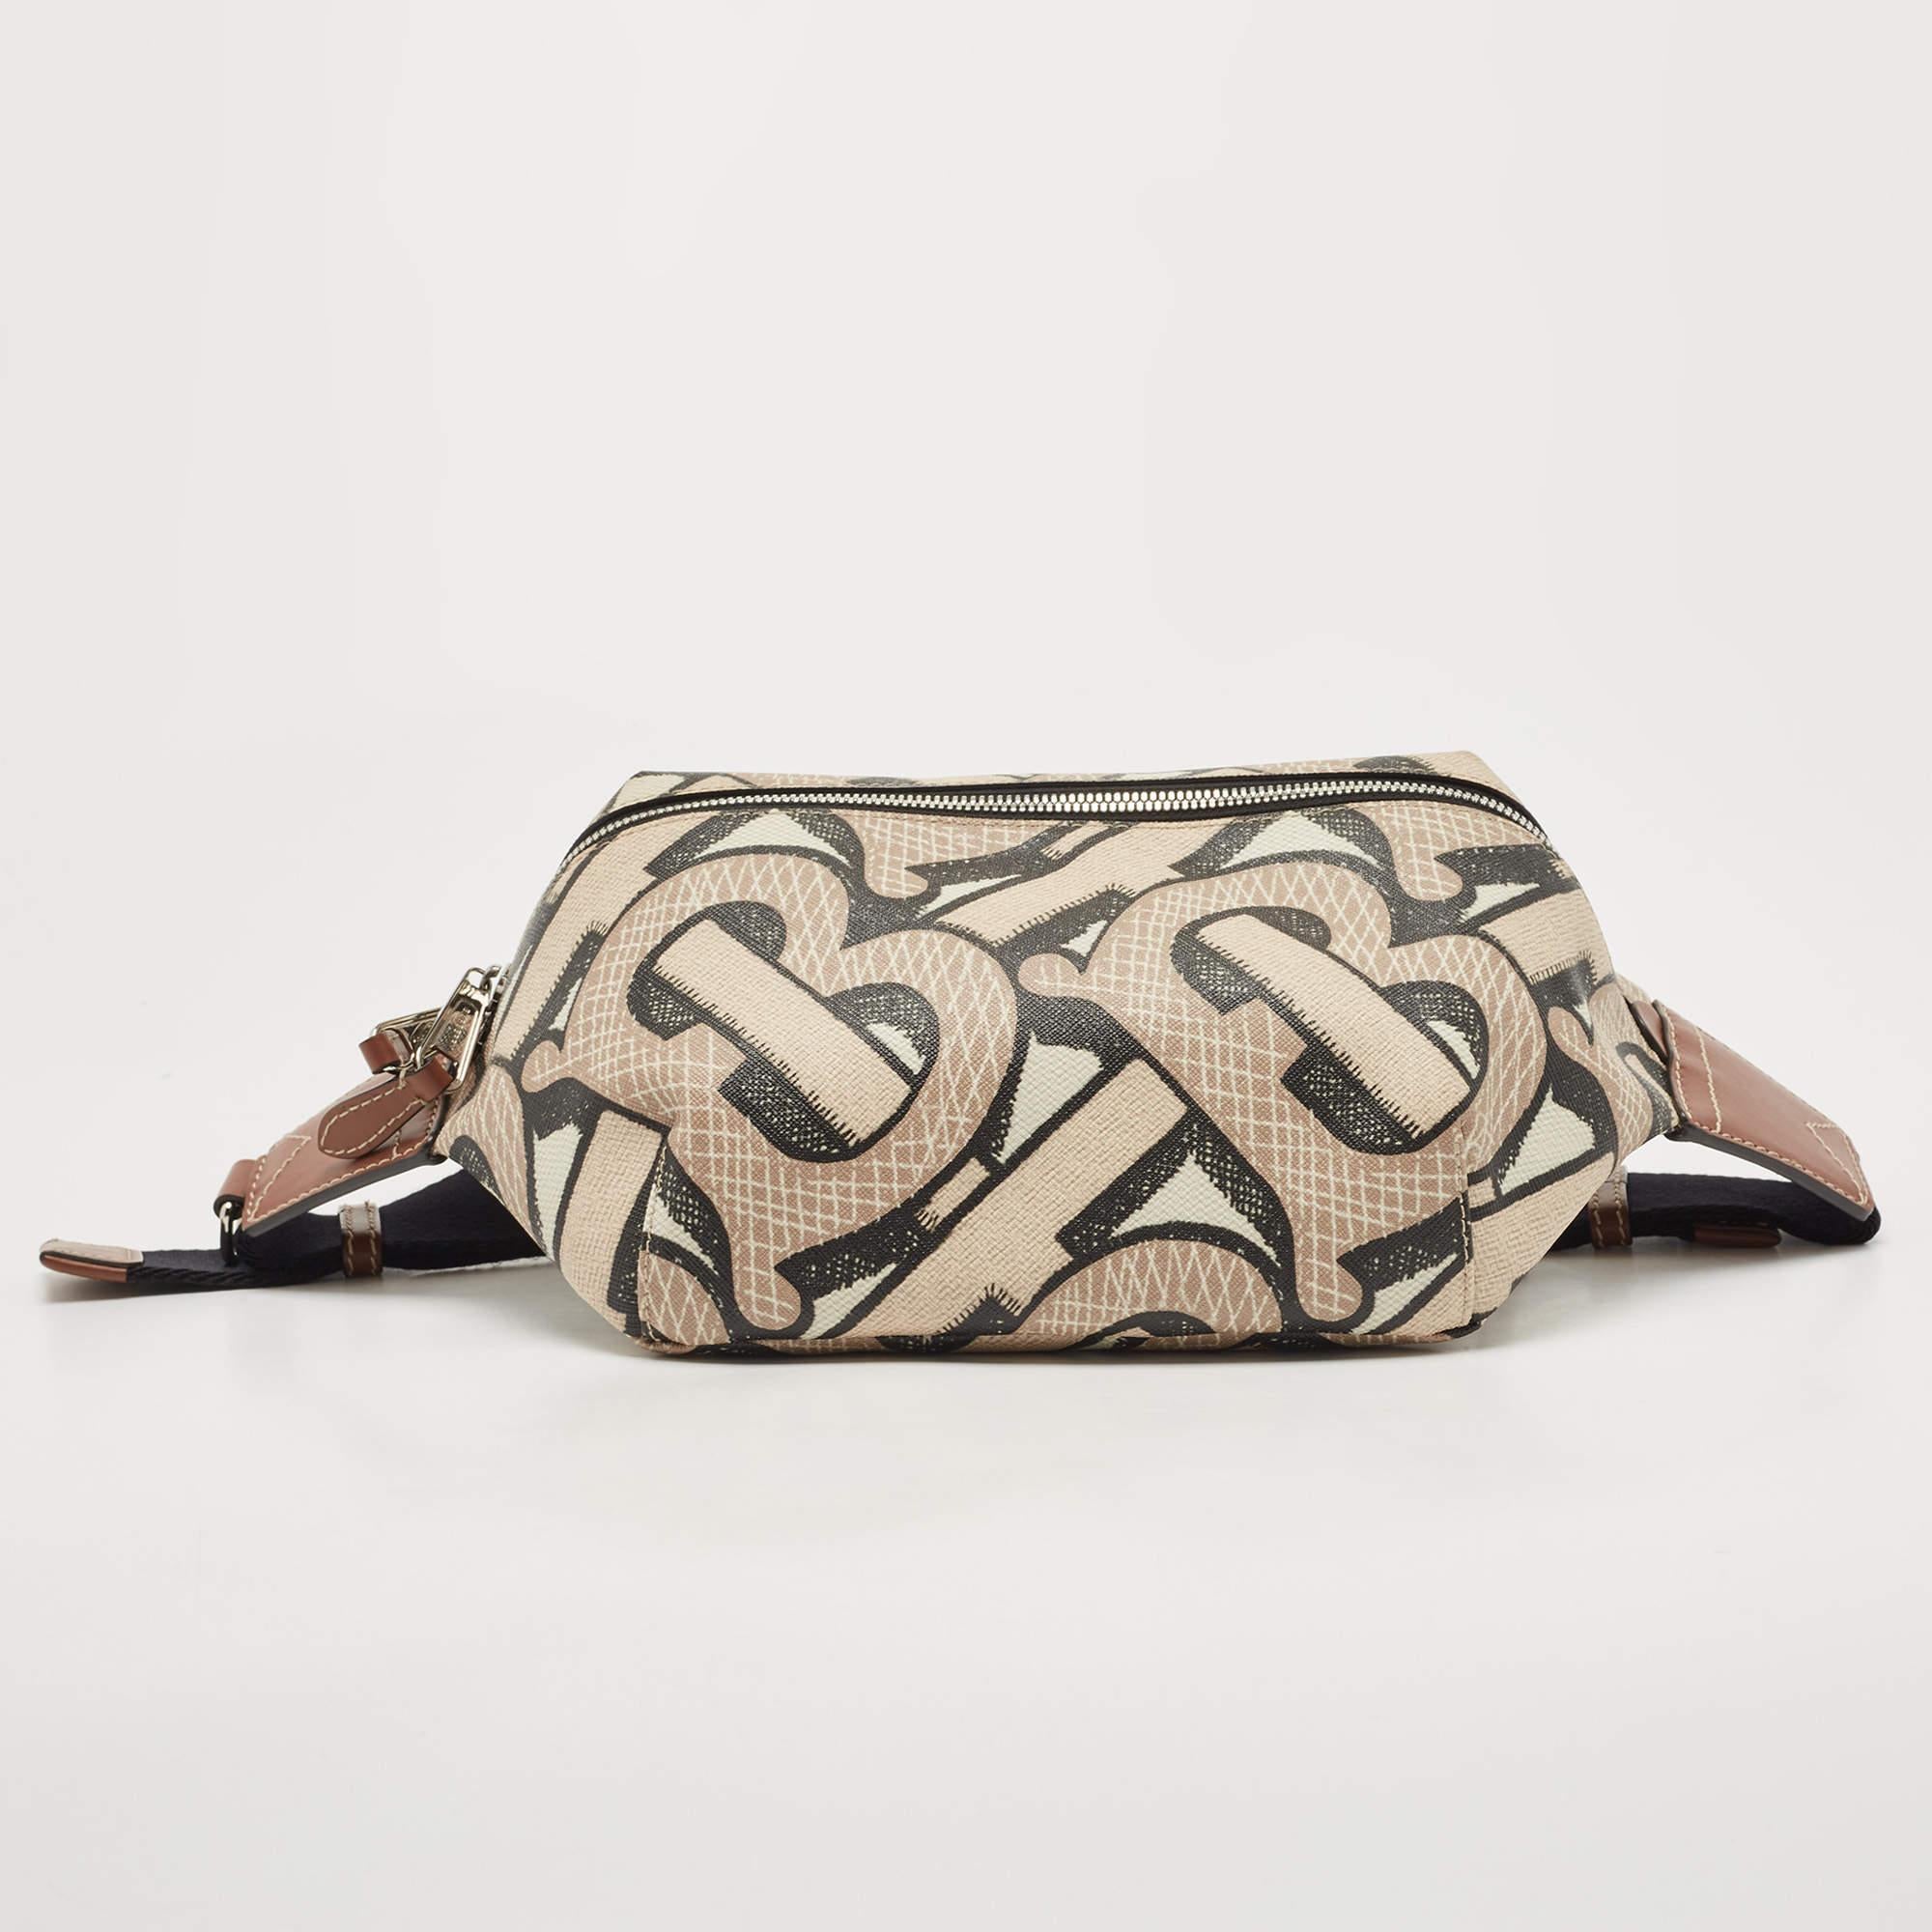 This bum bag by Burberry brings a practical and modish take. Crafted from logo-printed canvas, it is equipped with silver-tone hardware and an adjustable waist belt. The zip closure opens to a fabric-lined interior that houses a pocket.

